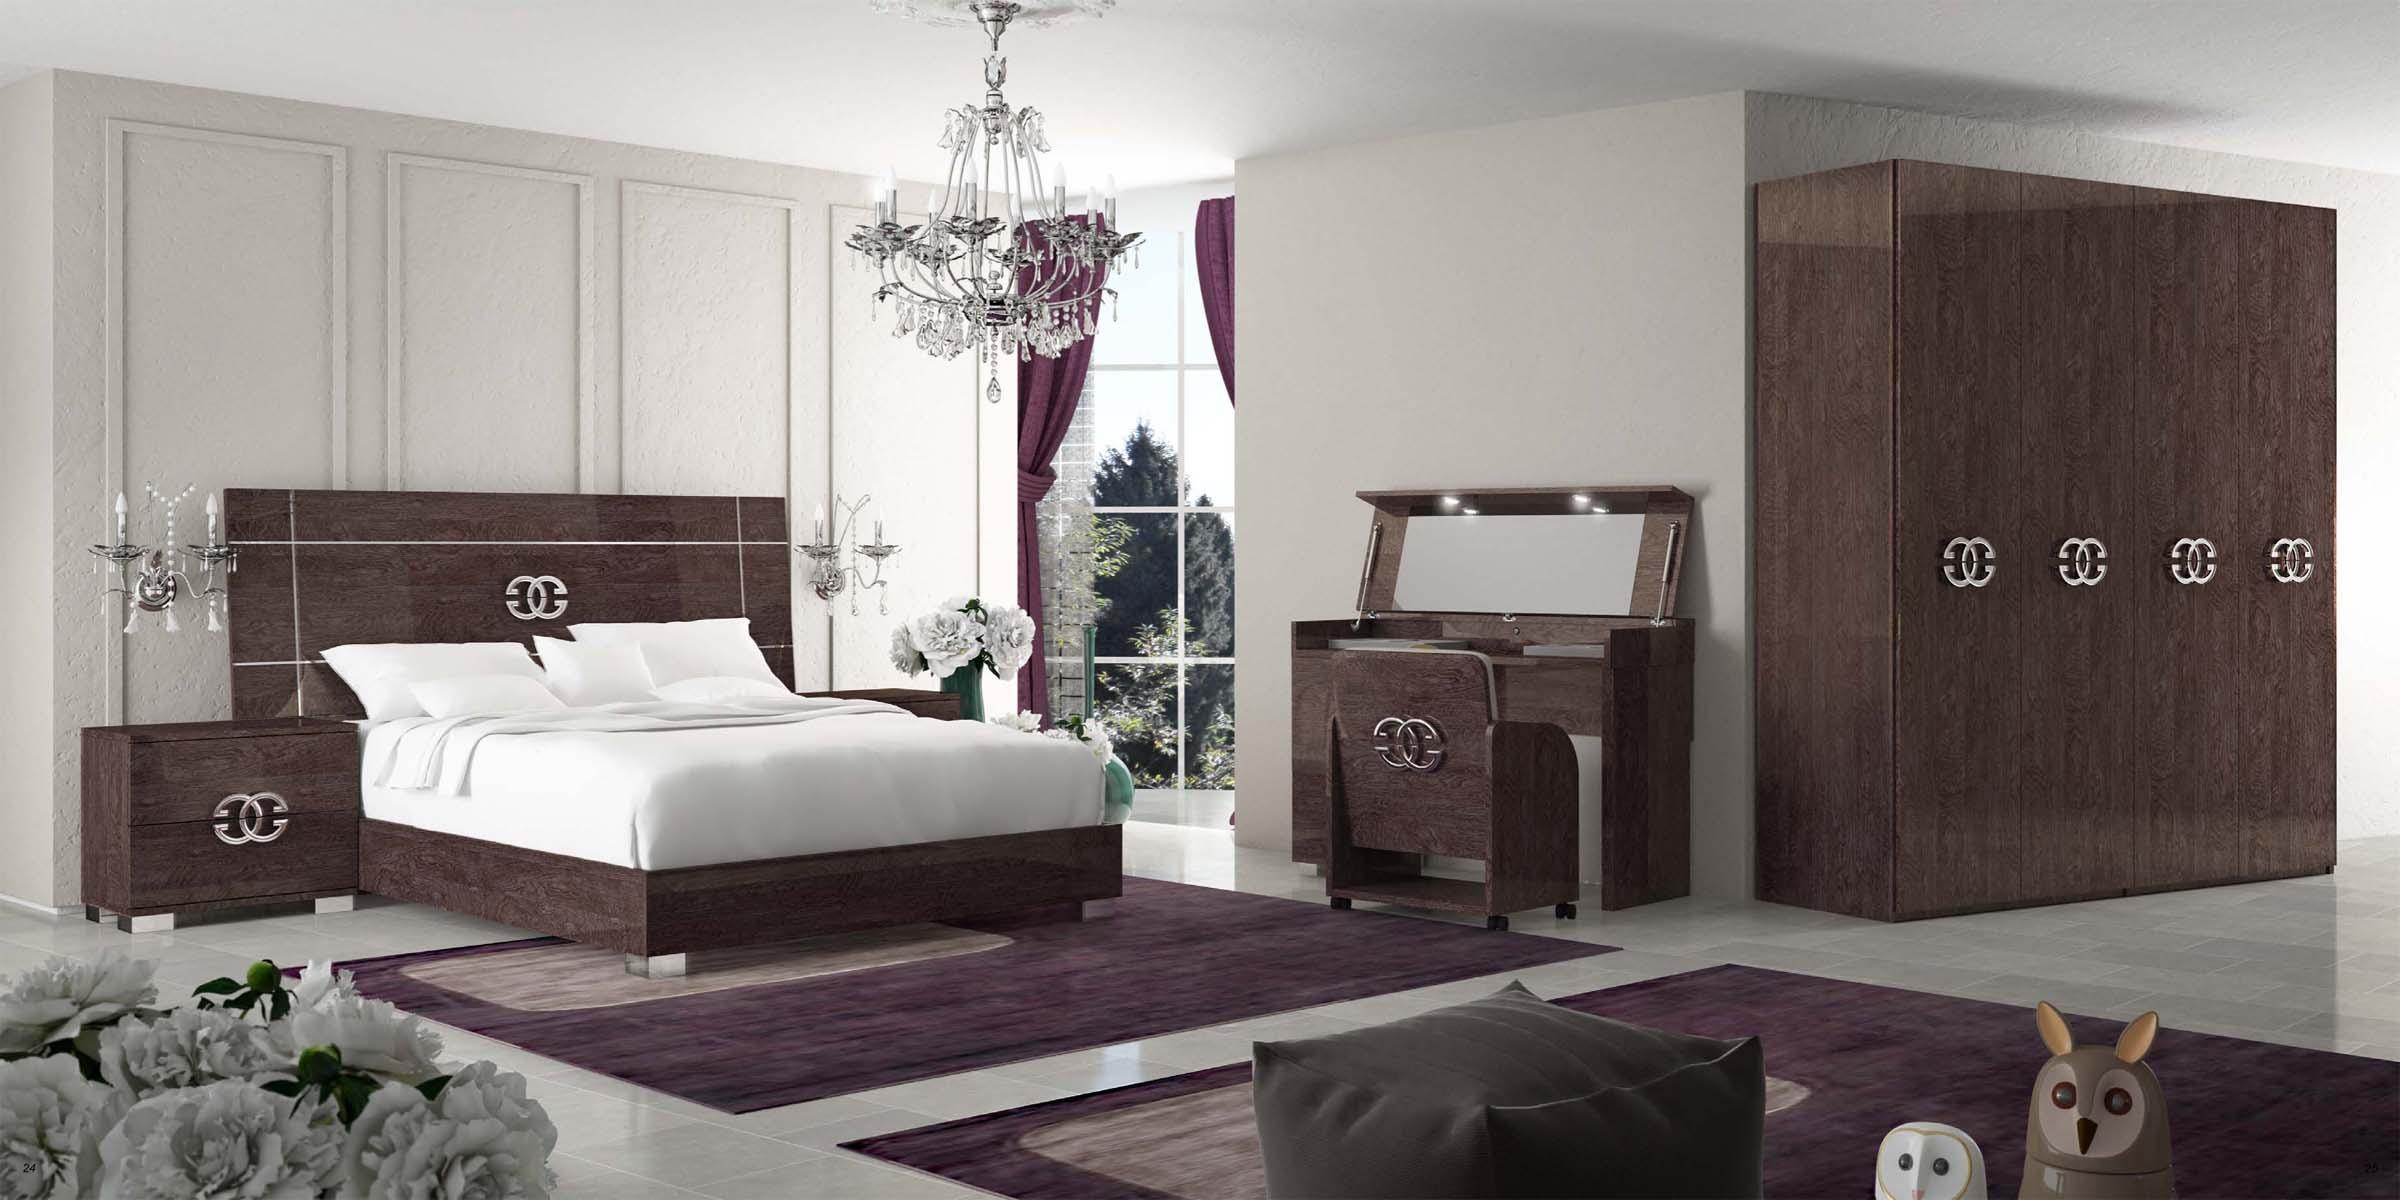 

    
PRESTIGE-CLASSIC-BED-Q-2NDM-5PC Glossy Walnut Queen Bedroom Set 5Pcs Contemporary Made in Italy ESF Prestige CLASSIC
